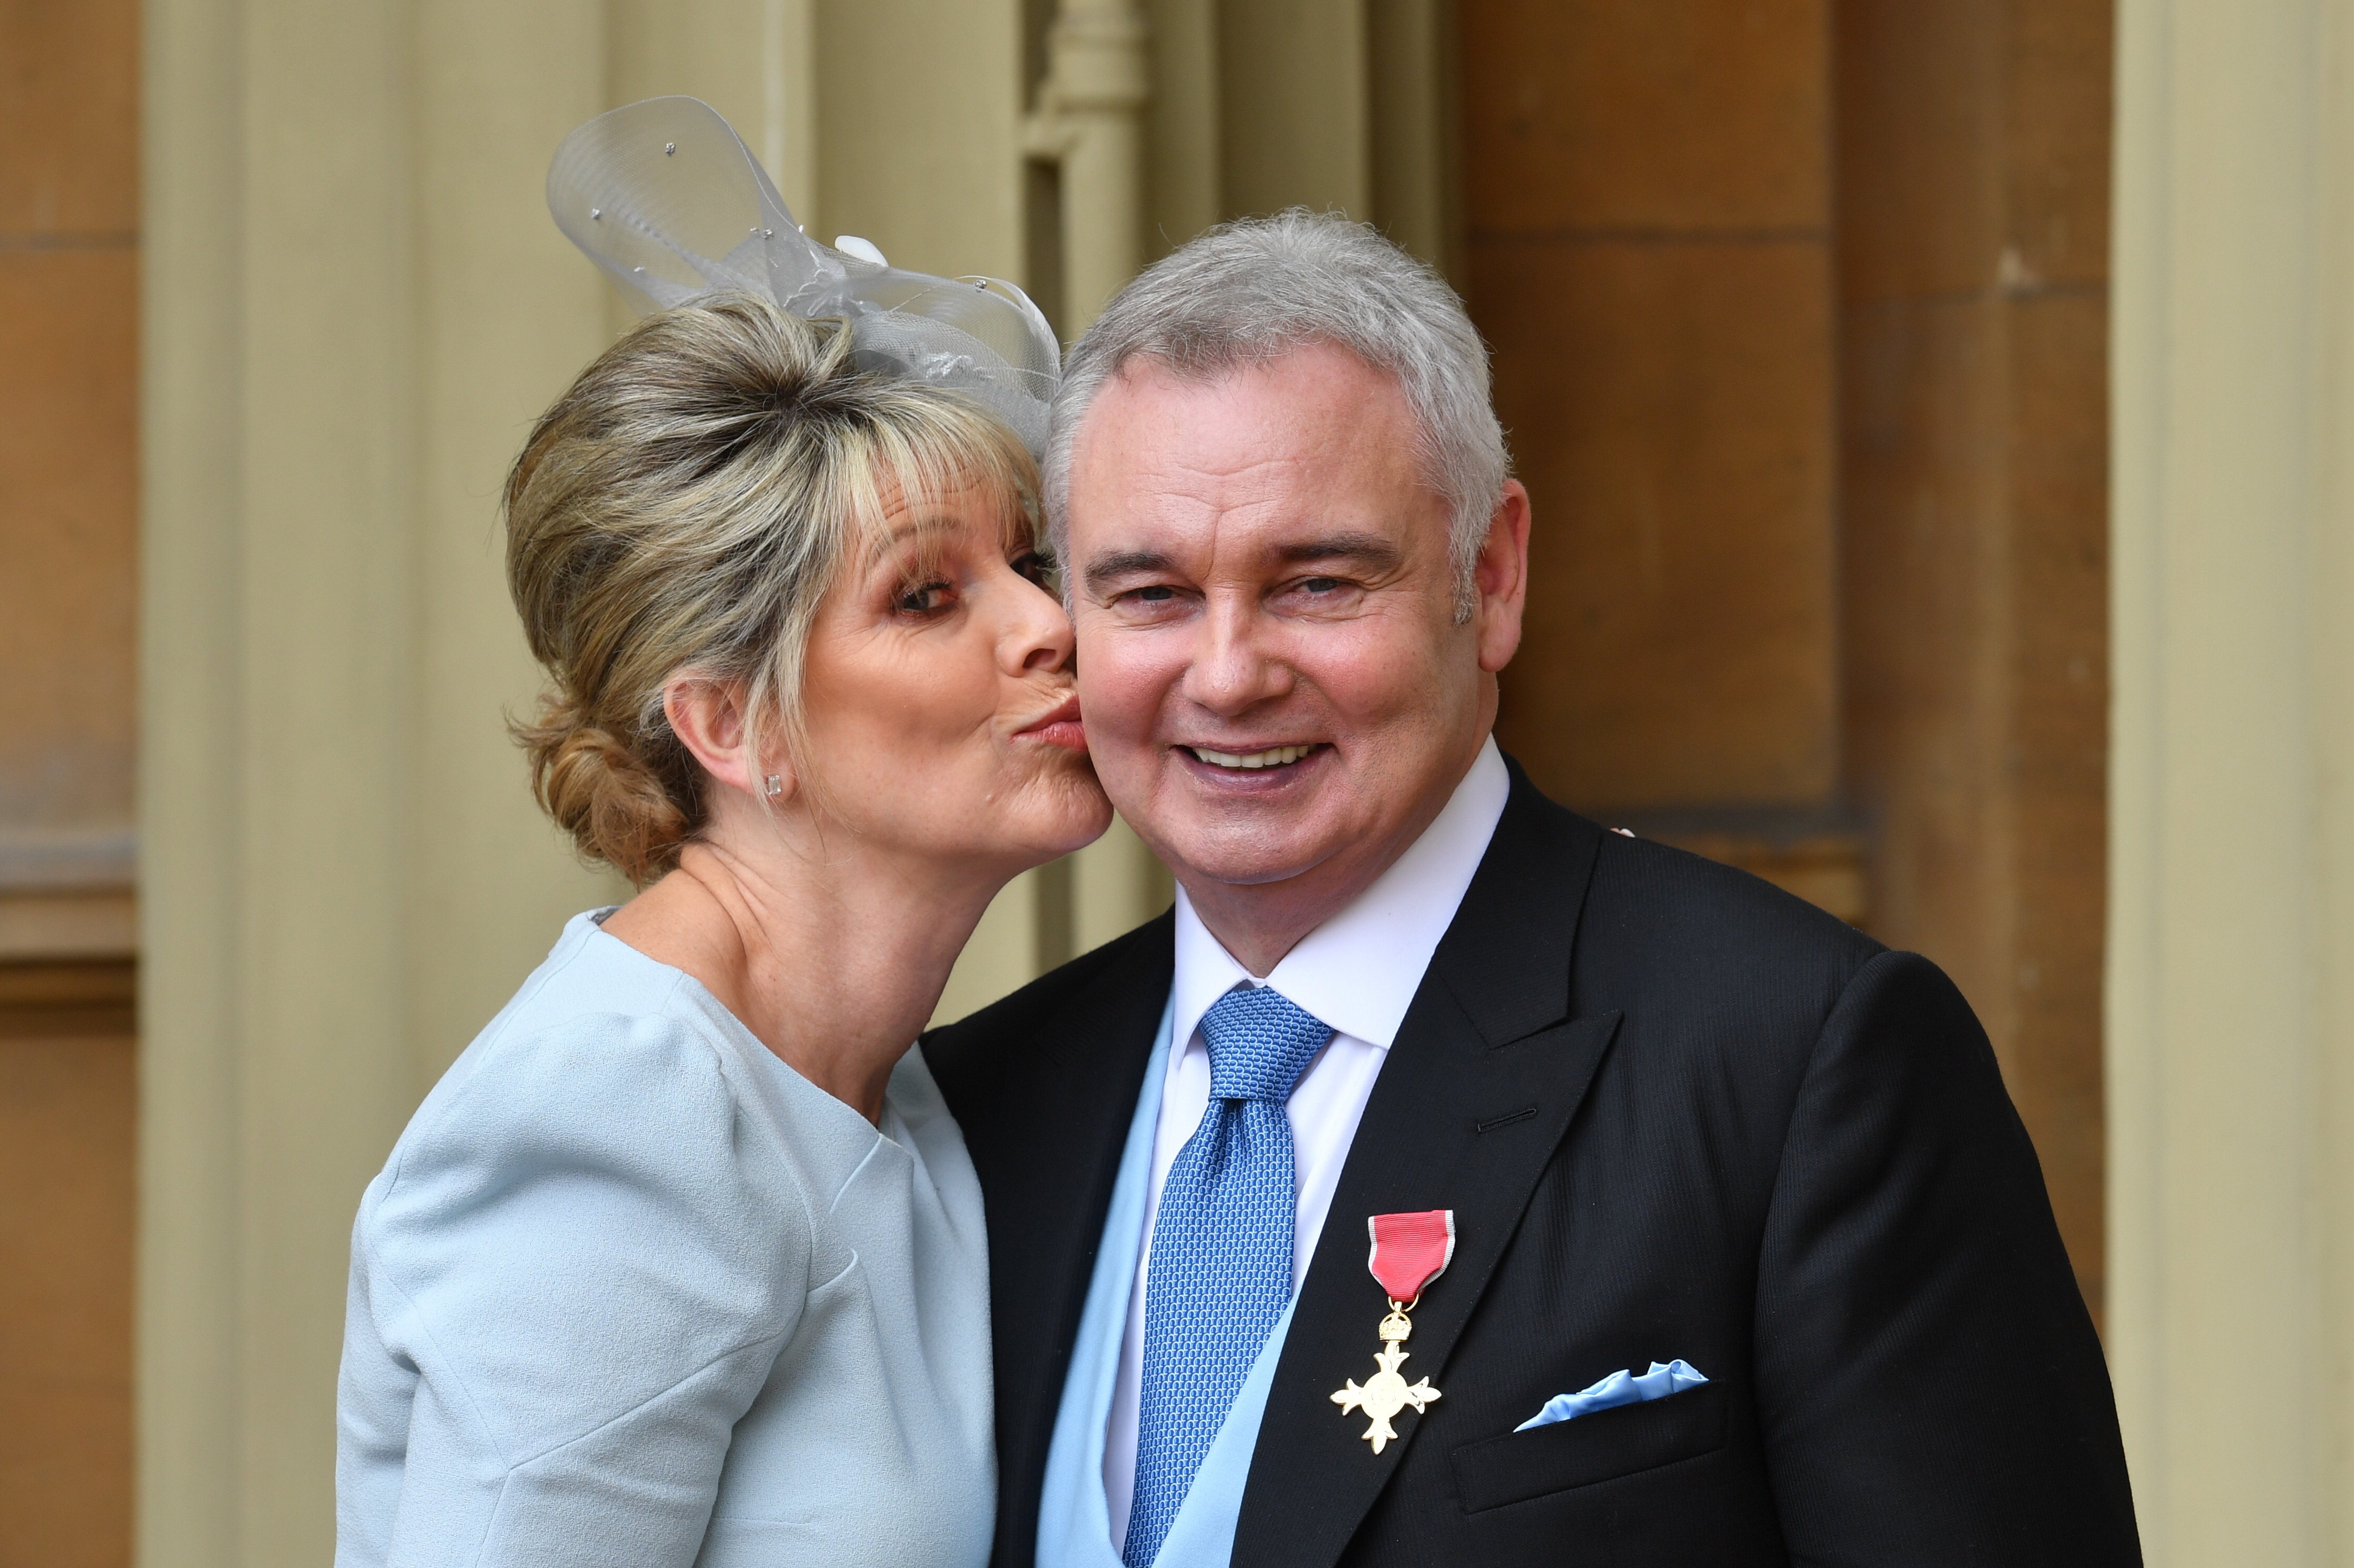 Eamonn Holmes breaks silence after bombshell split with Ruth Langsford